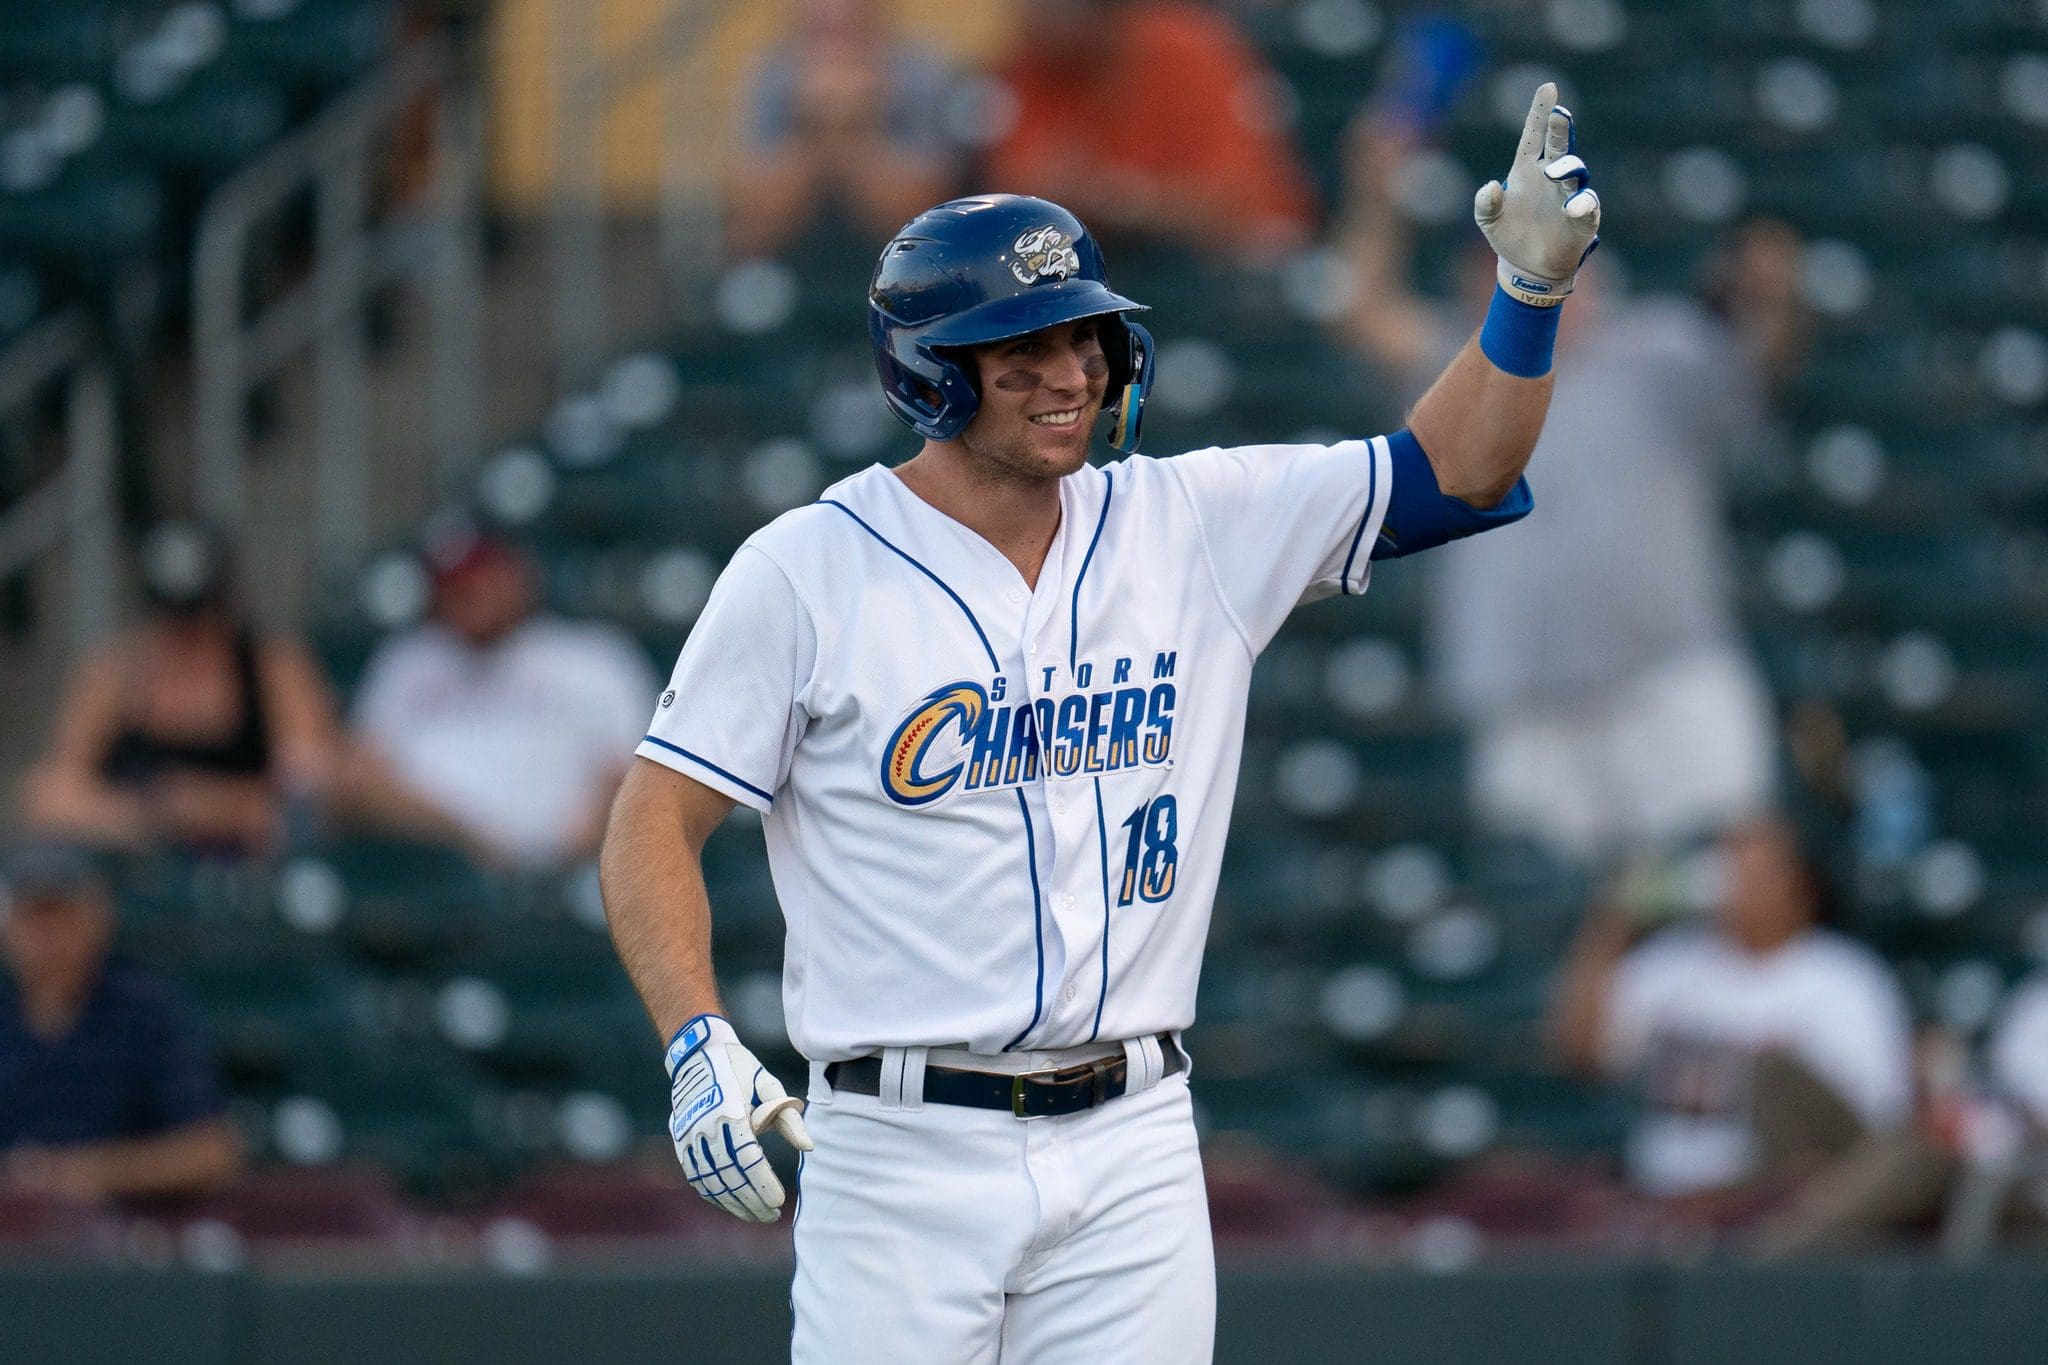 Part-Time Accountant | Omaha Storm Chasers